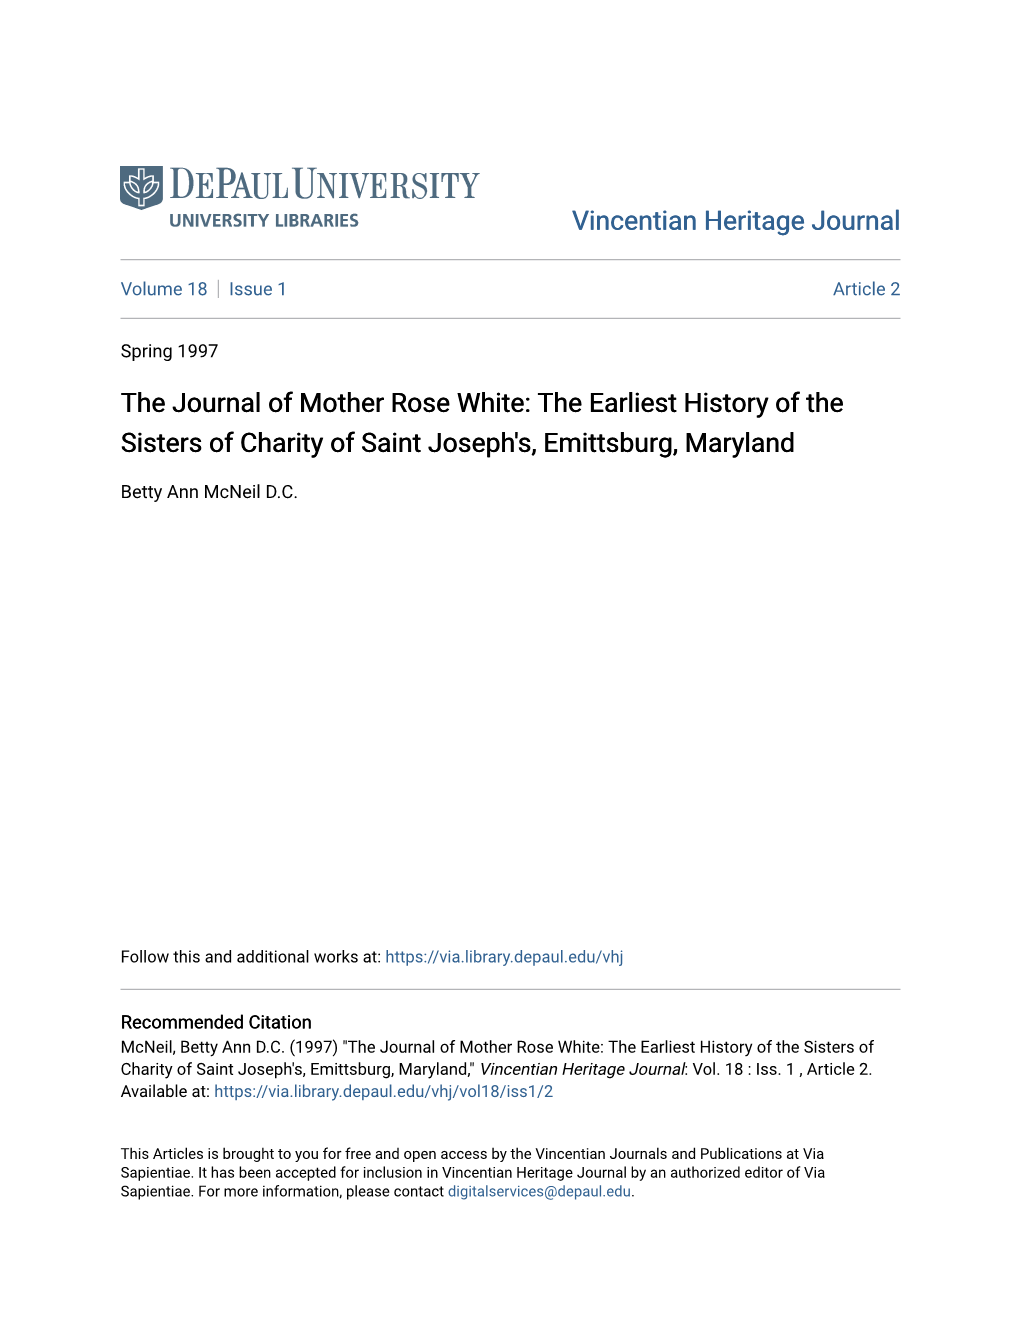 The Journal of Mother Rose White: the Earliest History of the Sisters of Charity of Saint Joseph's, Emittsburg, Maryland